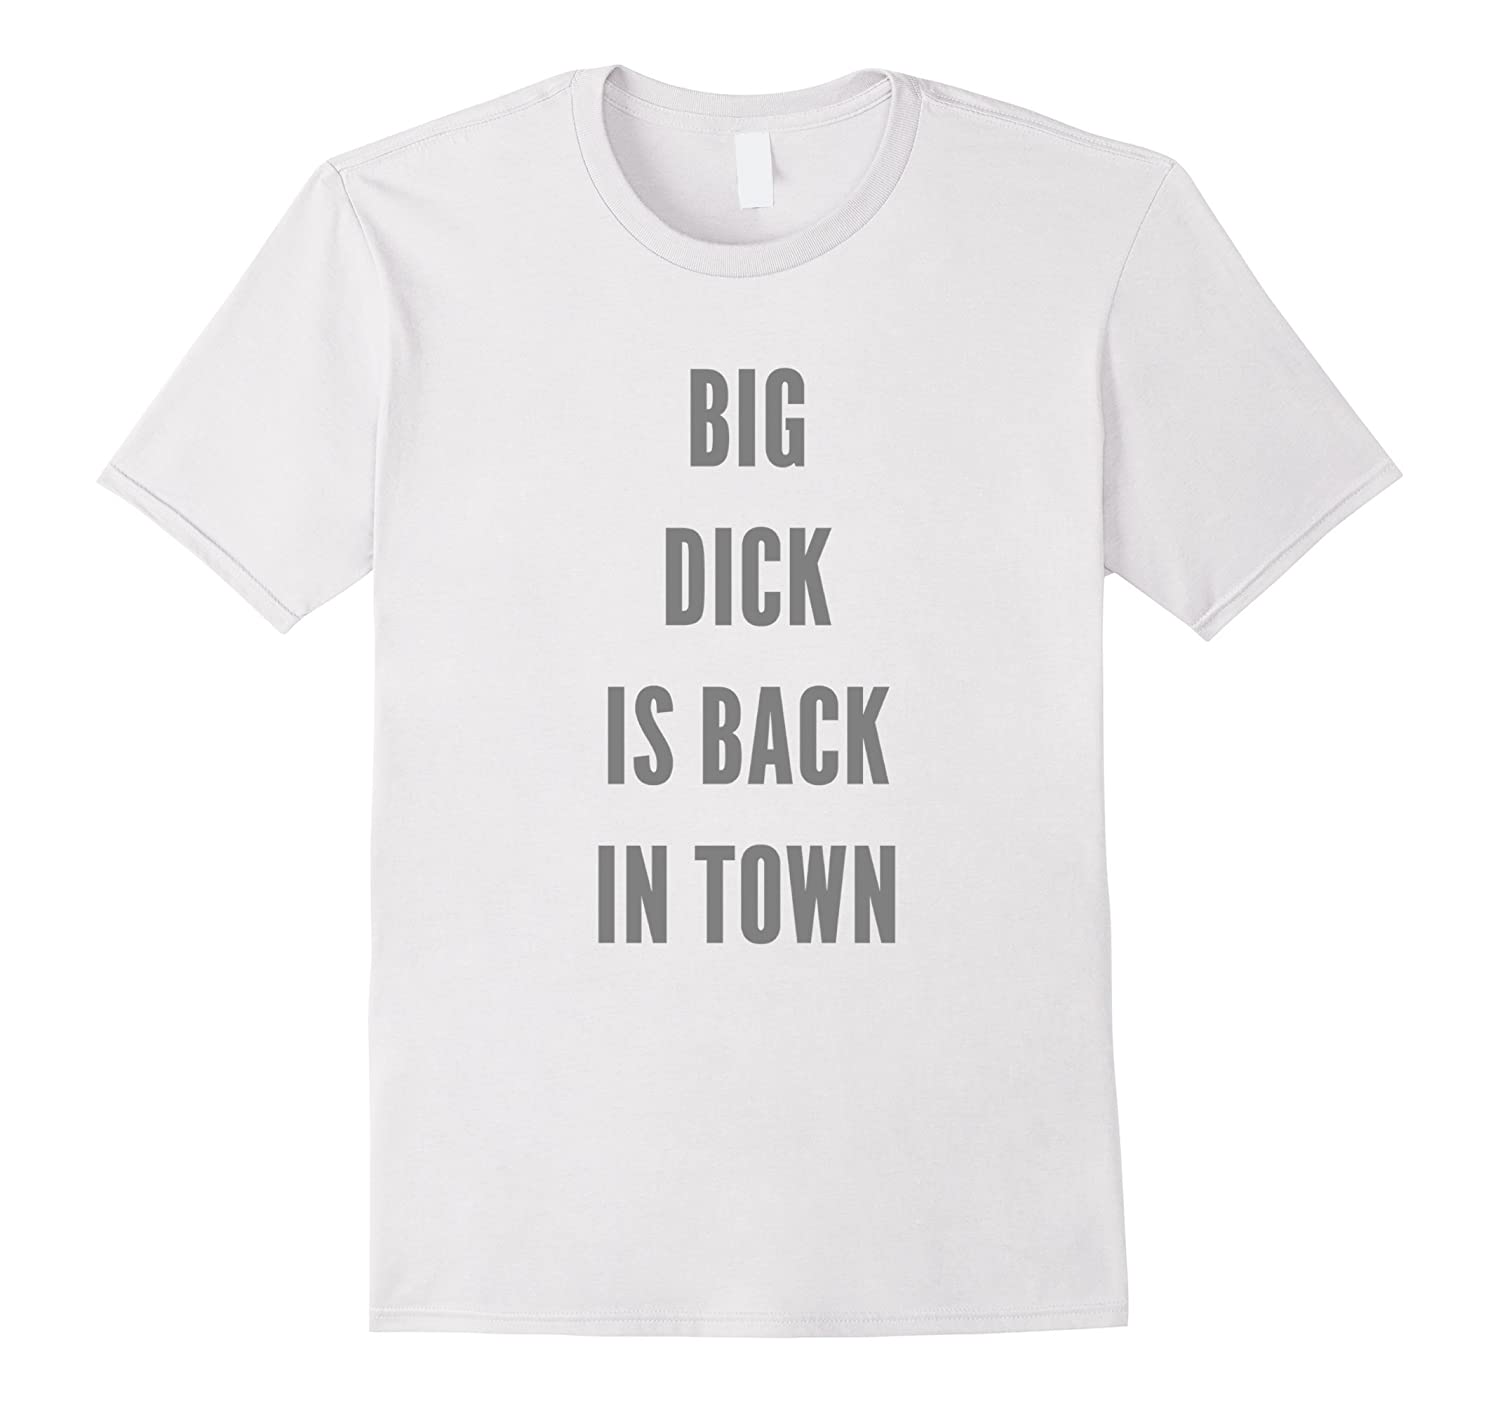 With thick cock cums t-shirt